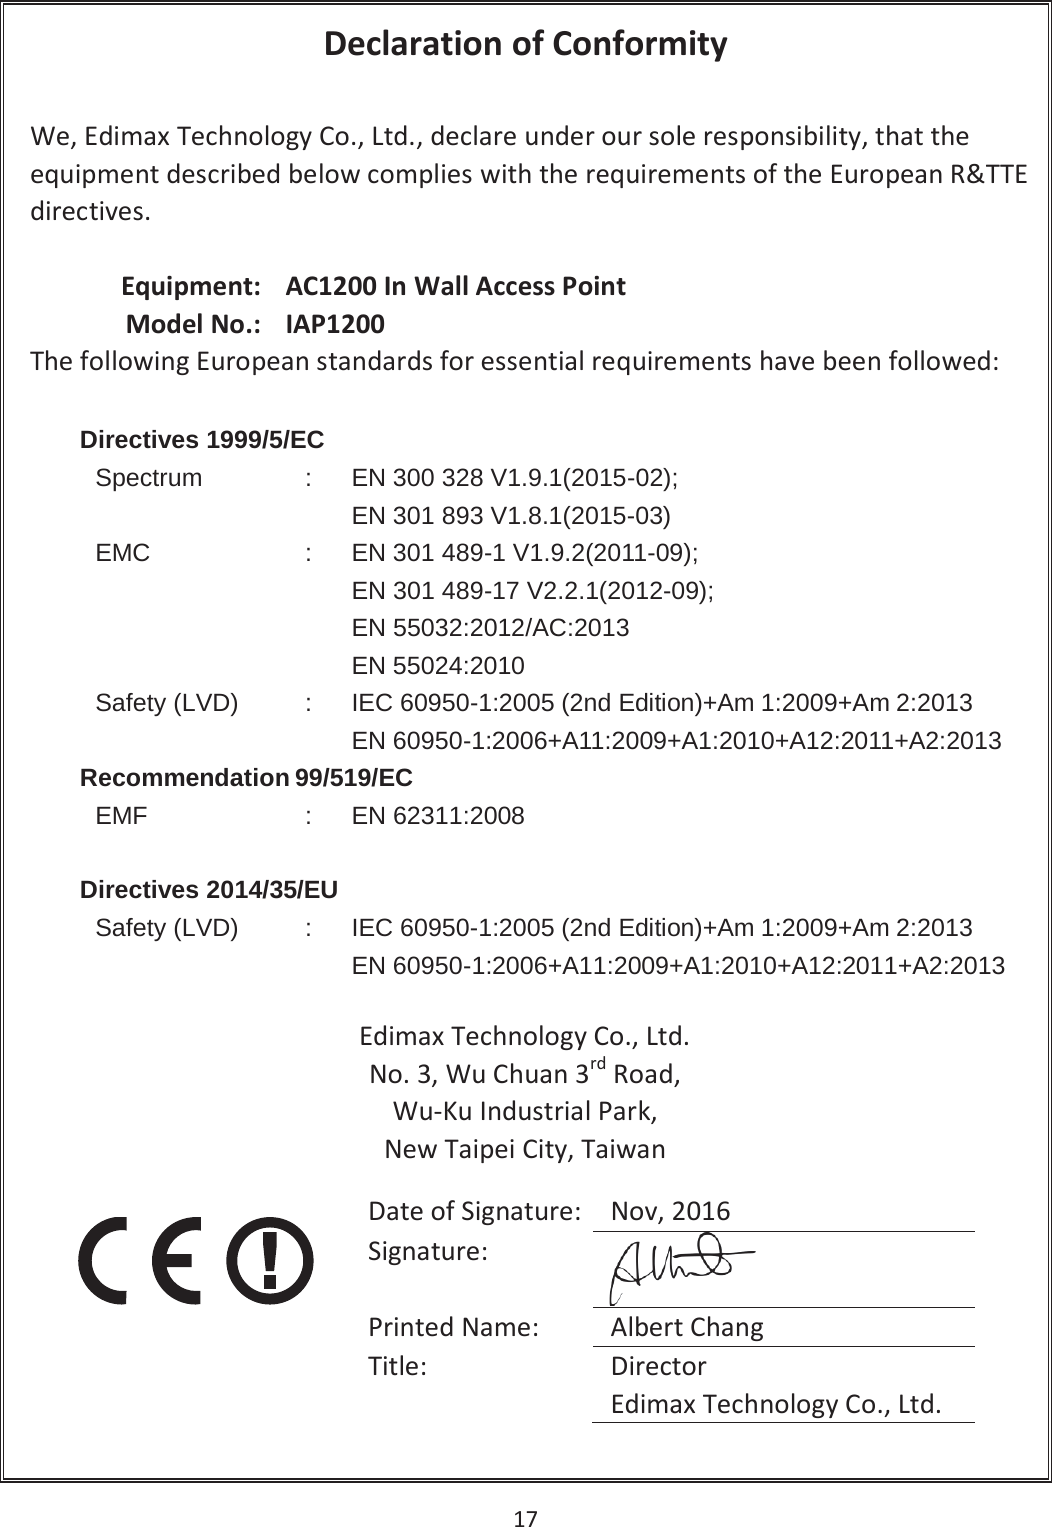 17   Declaration of Conformity  We, Edimax Technology Co., Ltd., declare under our sole responsibility, that the equipment described below complies with the requirements of the European R&amp;TTE directives.  Equipment: AC1200 In Wall Access Point Model No.: IAP1200 The following European standards for essential requirements have been followed: Directives 1999/5/ECSpectrum:EN 300 328 V1.9.1(2015-02);EN 301 893 V1.8.1(2015-03) EMC:EN 301 489-1 V1.9.2(2011-09);EN301 489-17 V2.2.1(2012-09);EN55032:2012/AC:2013EN 55024:2010 Safety (LVD):IEC 60950-1:2005 (2nd Edition)+Am 1:2009+Am 2:2013EN 60950-1:2006+A11:2009+A1:2010+A12:2011+A2:2013Recommendation 99/519/ECEMF:EN 62311:2008Directives 2014/35/EU Safety (LVD):IEC 60950-1:2005 (2nd Edition)+Am 1:2009+Am 2:2013EN 60950-1:2006+A11:2009+A1:2010+A12:2011+A2:2013Edimax Technology Co., Ltd. No. 3, Wu Chuan 3rd Road, Wu-Ku Industrial Park, New Taipei City, Taiwan    Date of Signature: Nov, 2016 Signature:  Printed Name: Albert Chang Title: Director Edimax Technology Co., Ltd. 